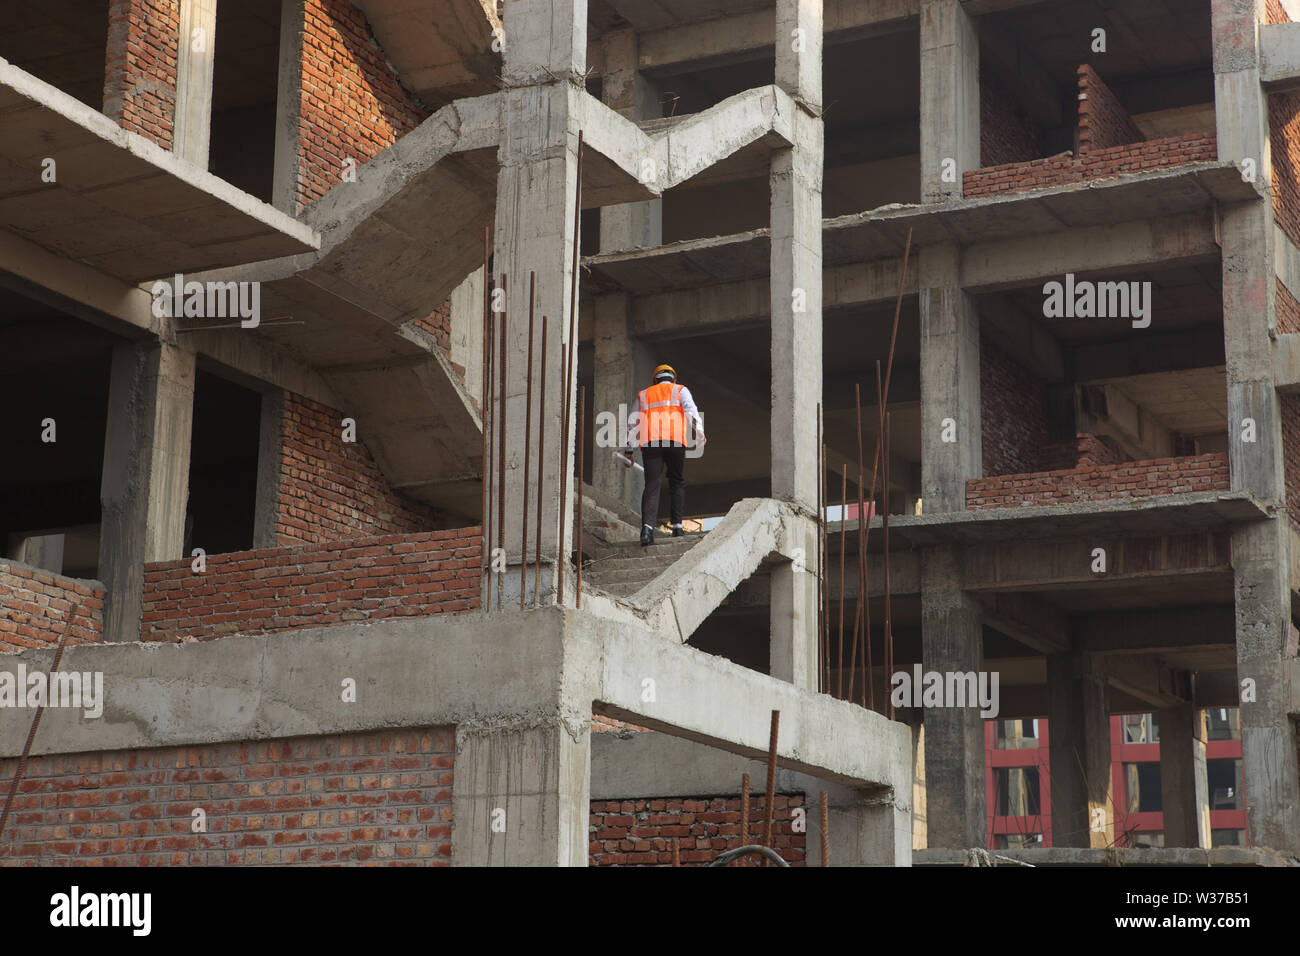 Rear view of a architect Surveying building Stock Photo